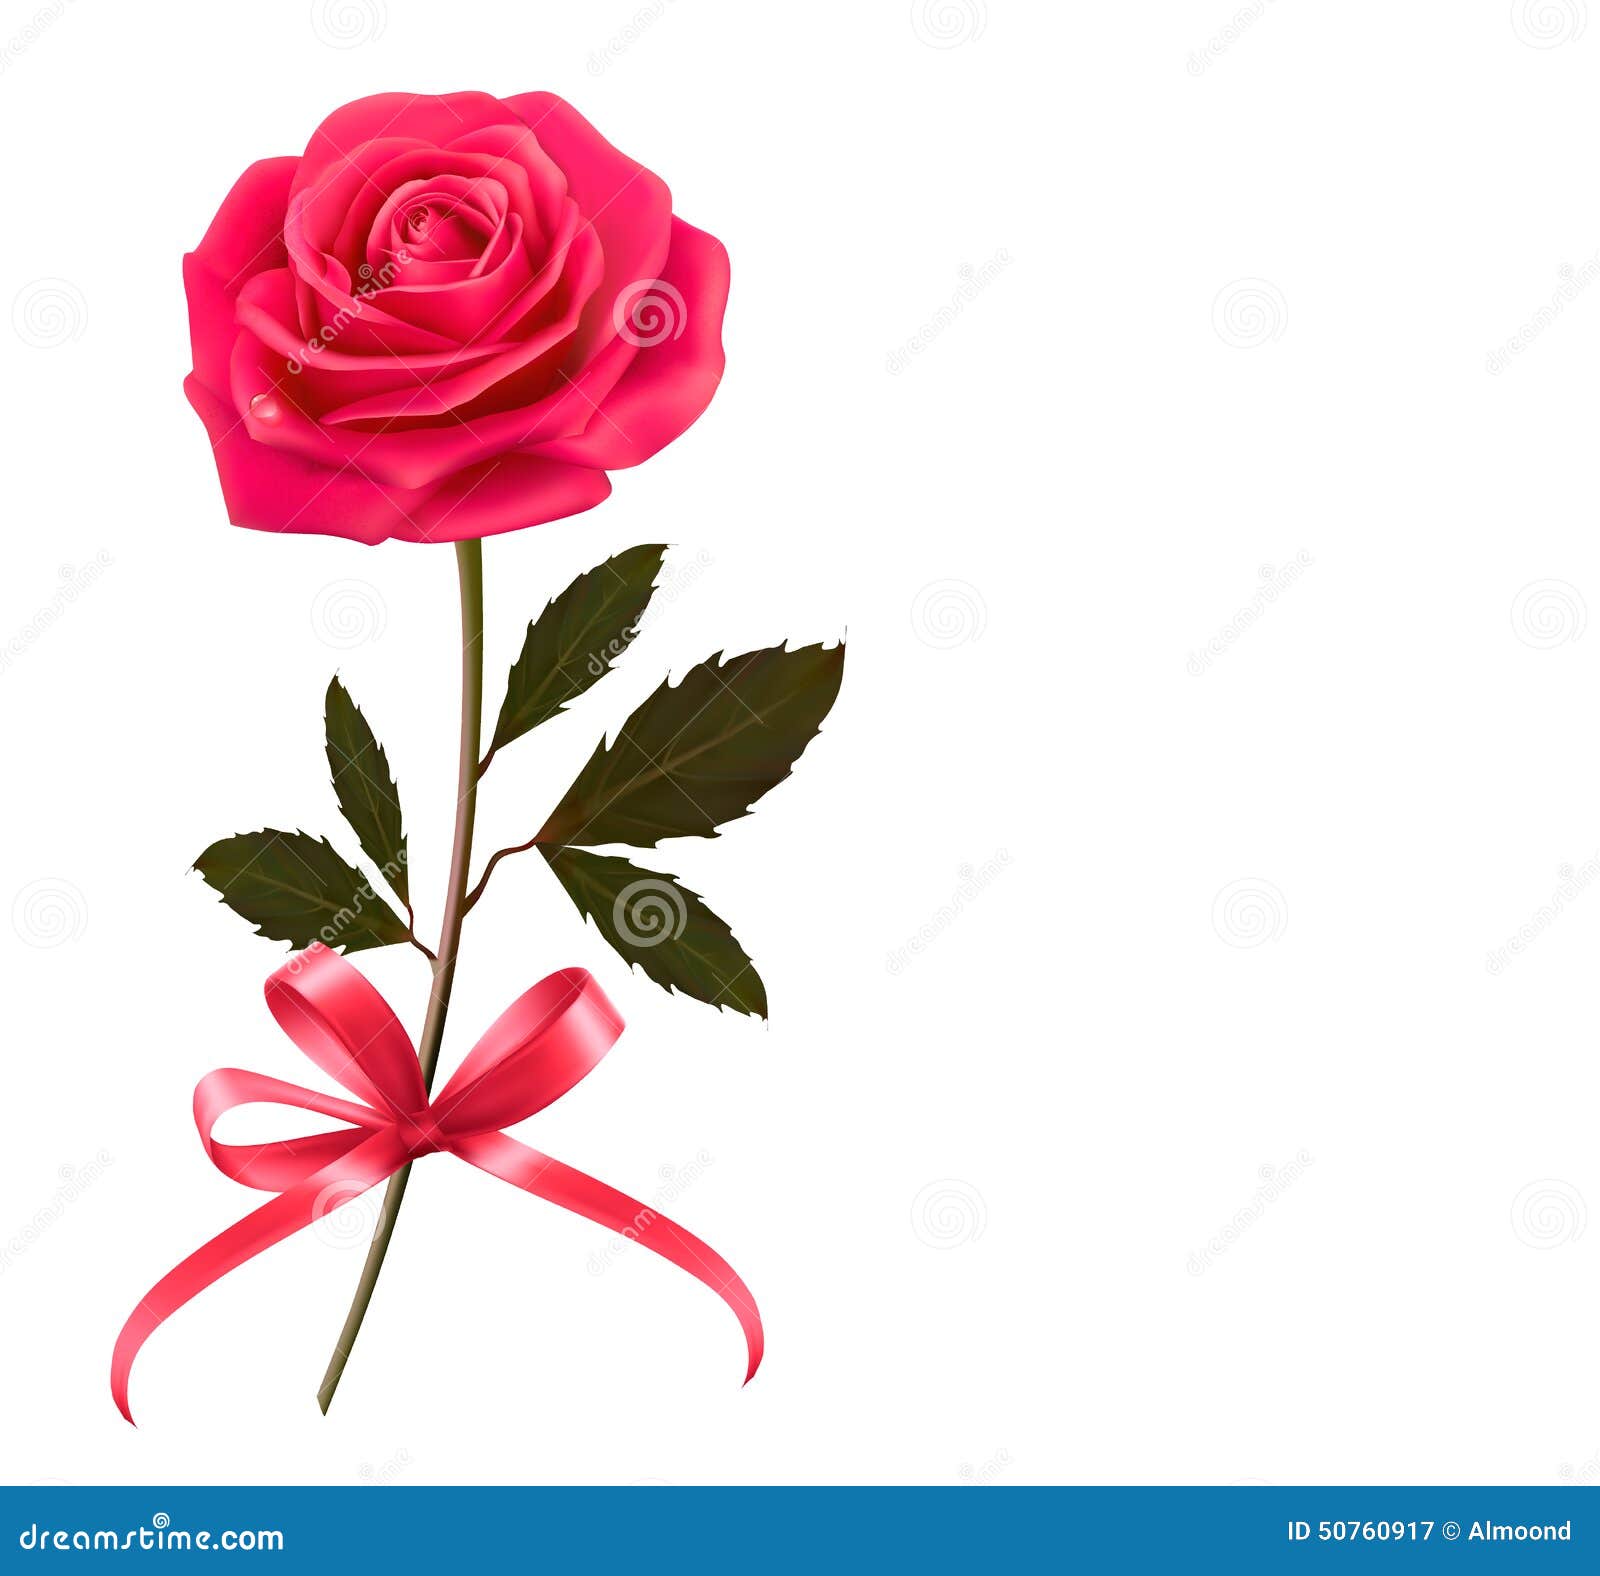 background with rose and a bow.